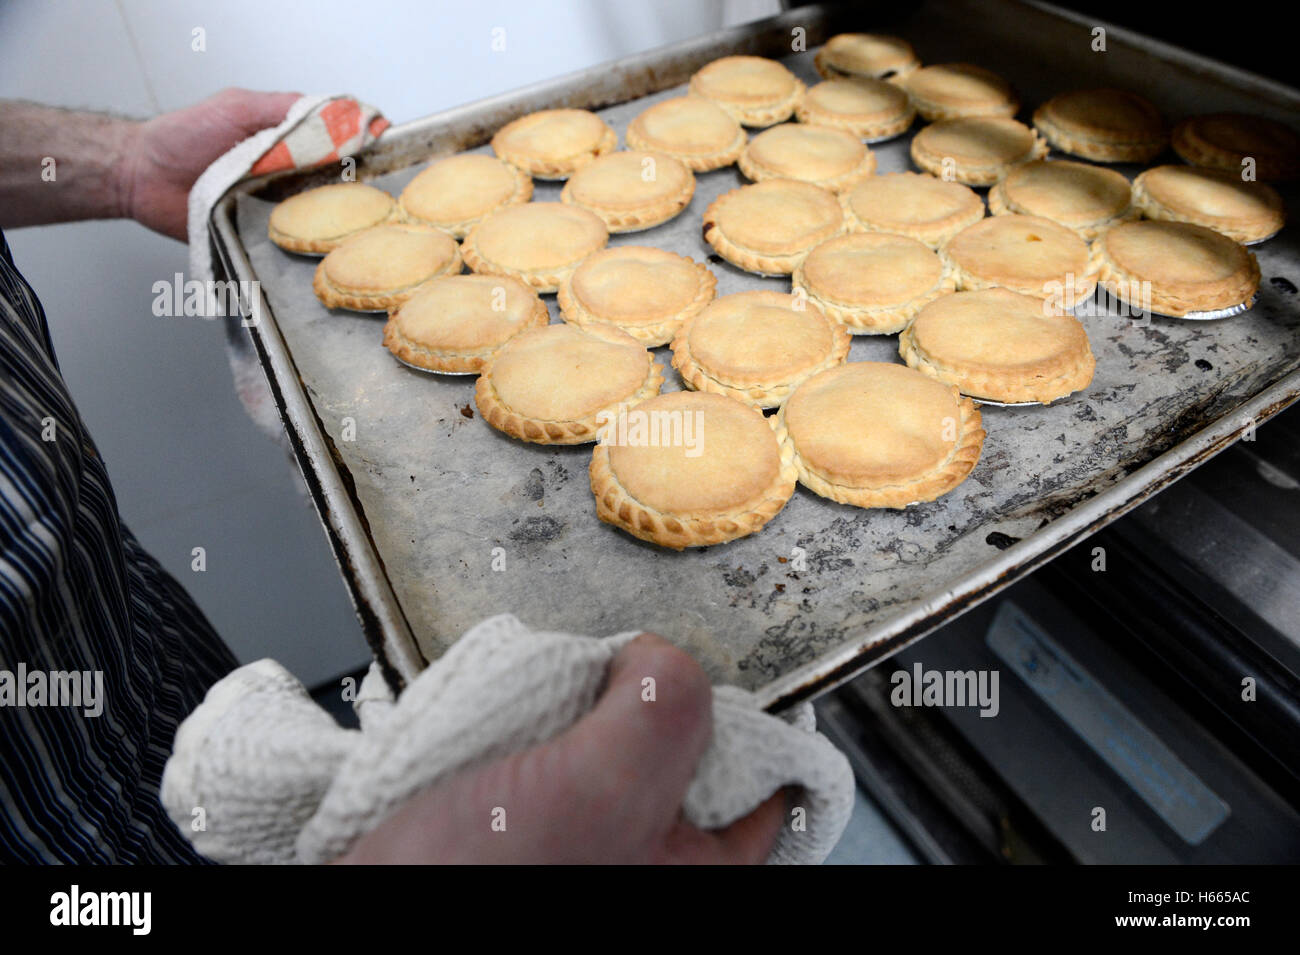 Baker making recipes and baking cakes and loaves in an oven Stock Photo